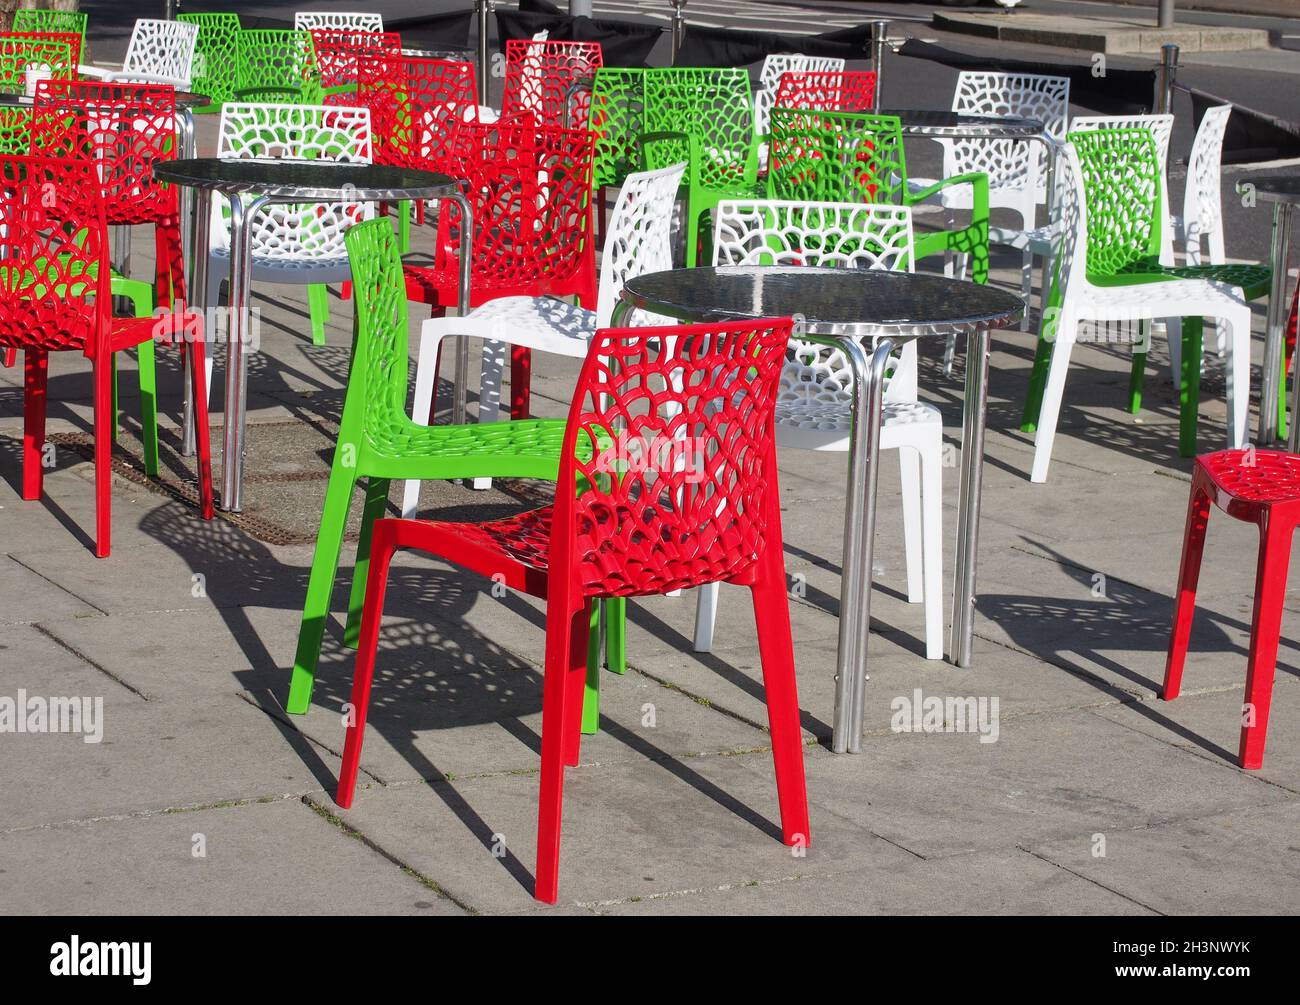 Colorful italian themed outdoor cafe chairs and tables on the street in summer sunlight in red green and white colors Stock Photo